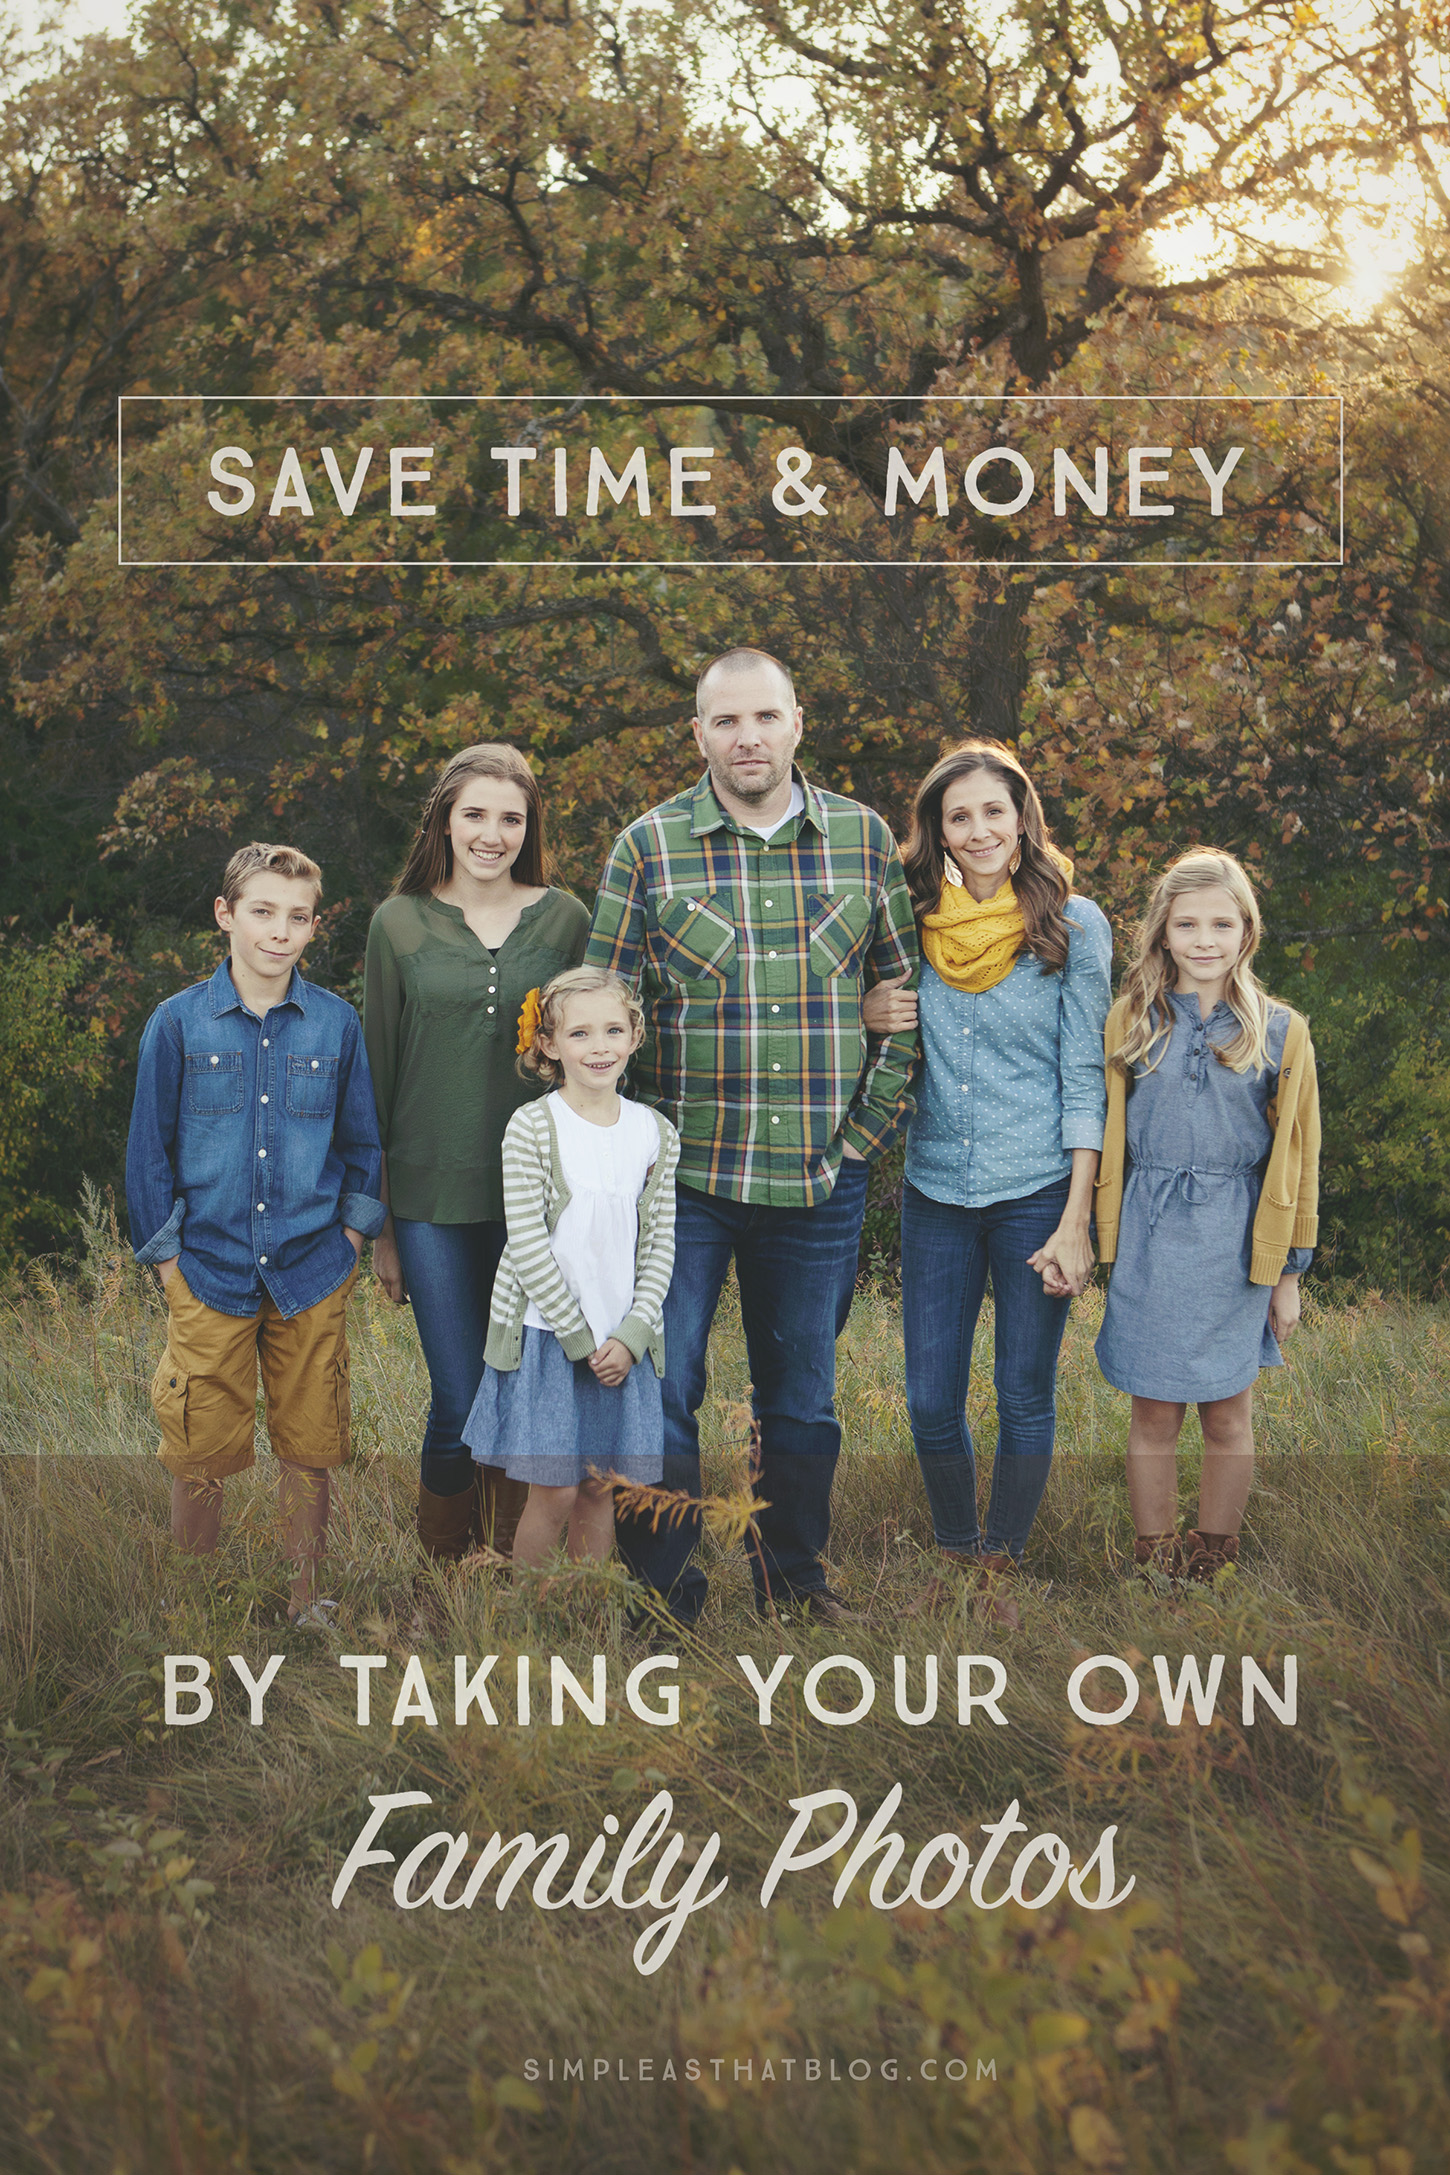 How to save time and money on family photos. I'm dishing all the tips, tricks and tools I've used over the years to take beautiful family photos for our Christmas cards at a fraction of the cost.